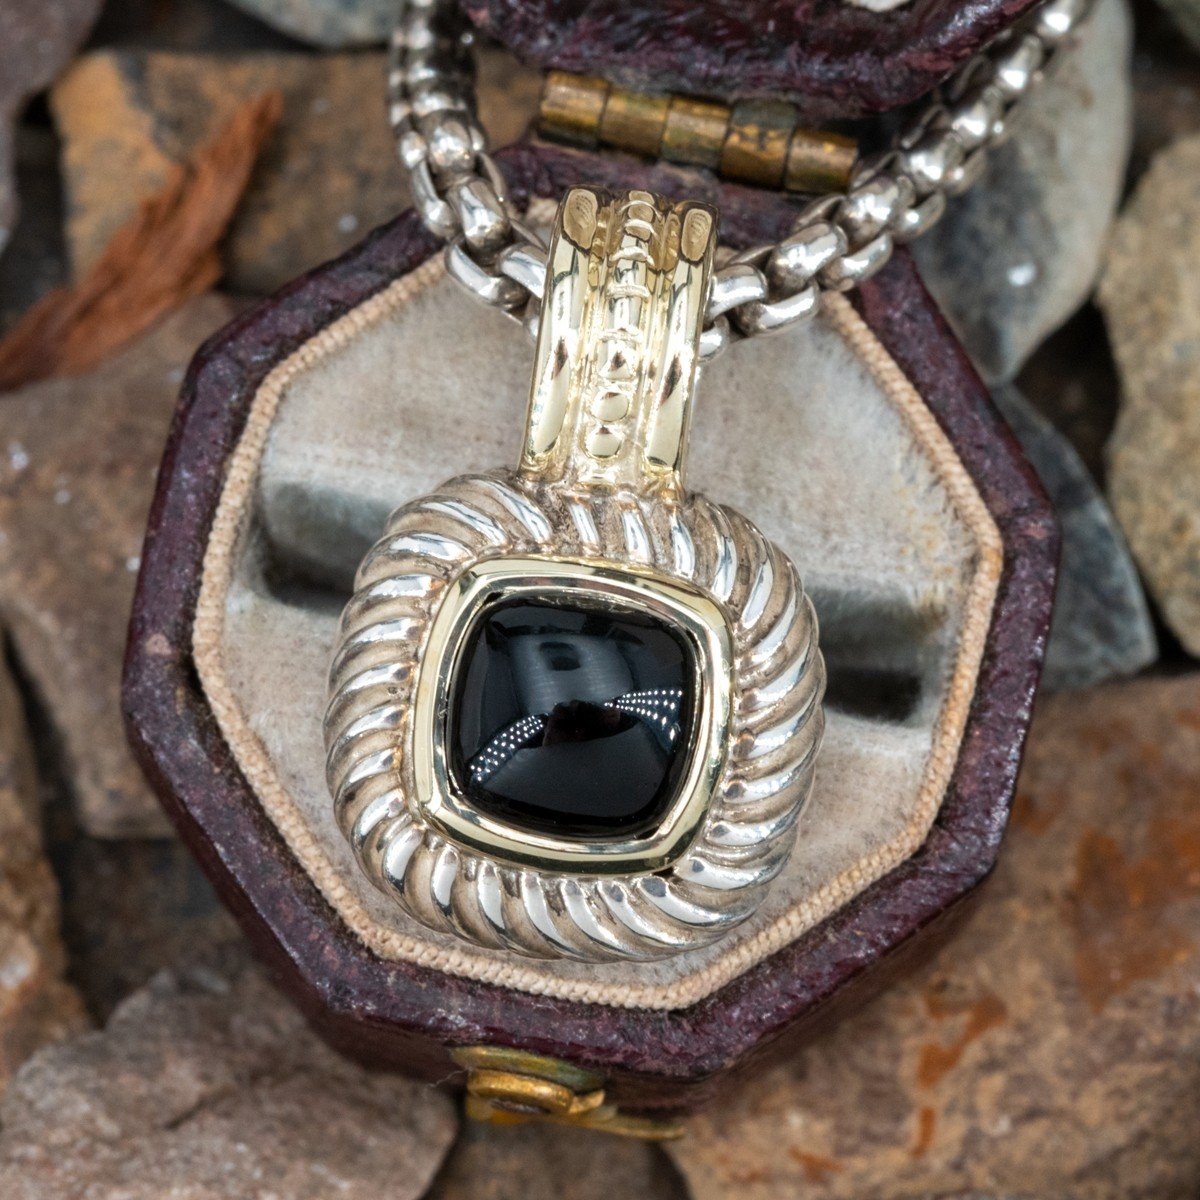 Oval Black Onyx and 14kt Yellow Gold Pendant Necklace